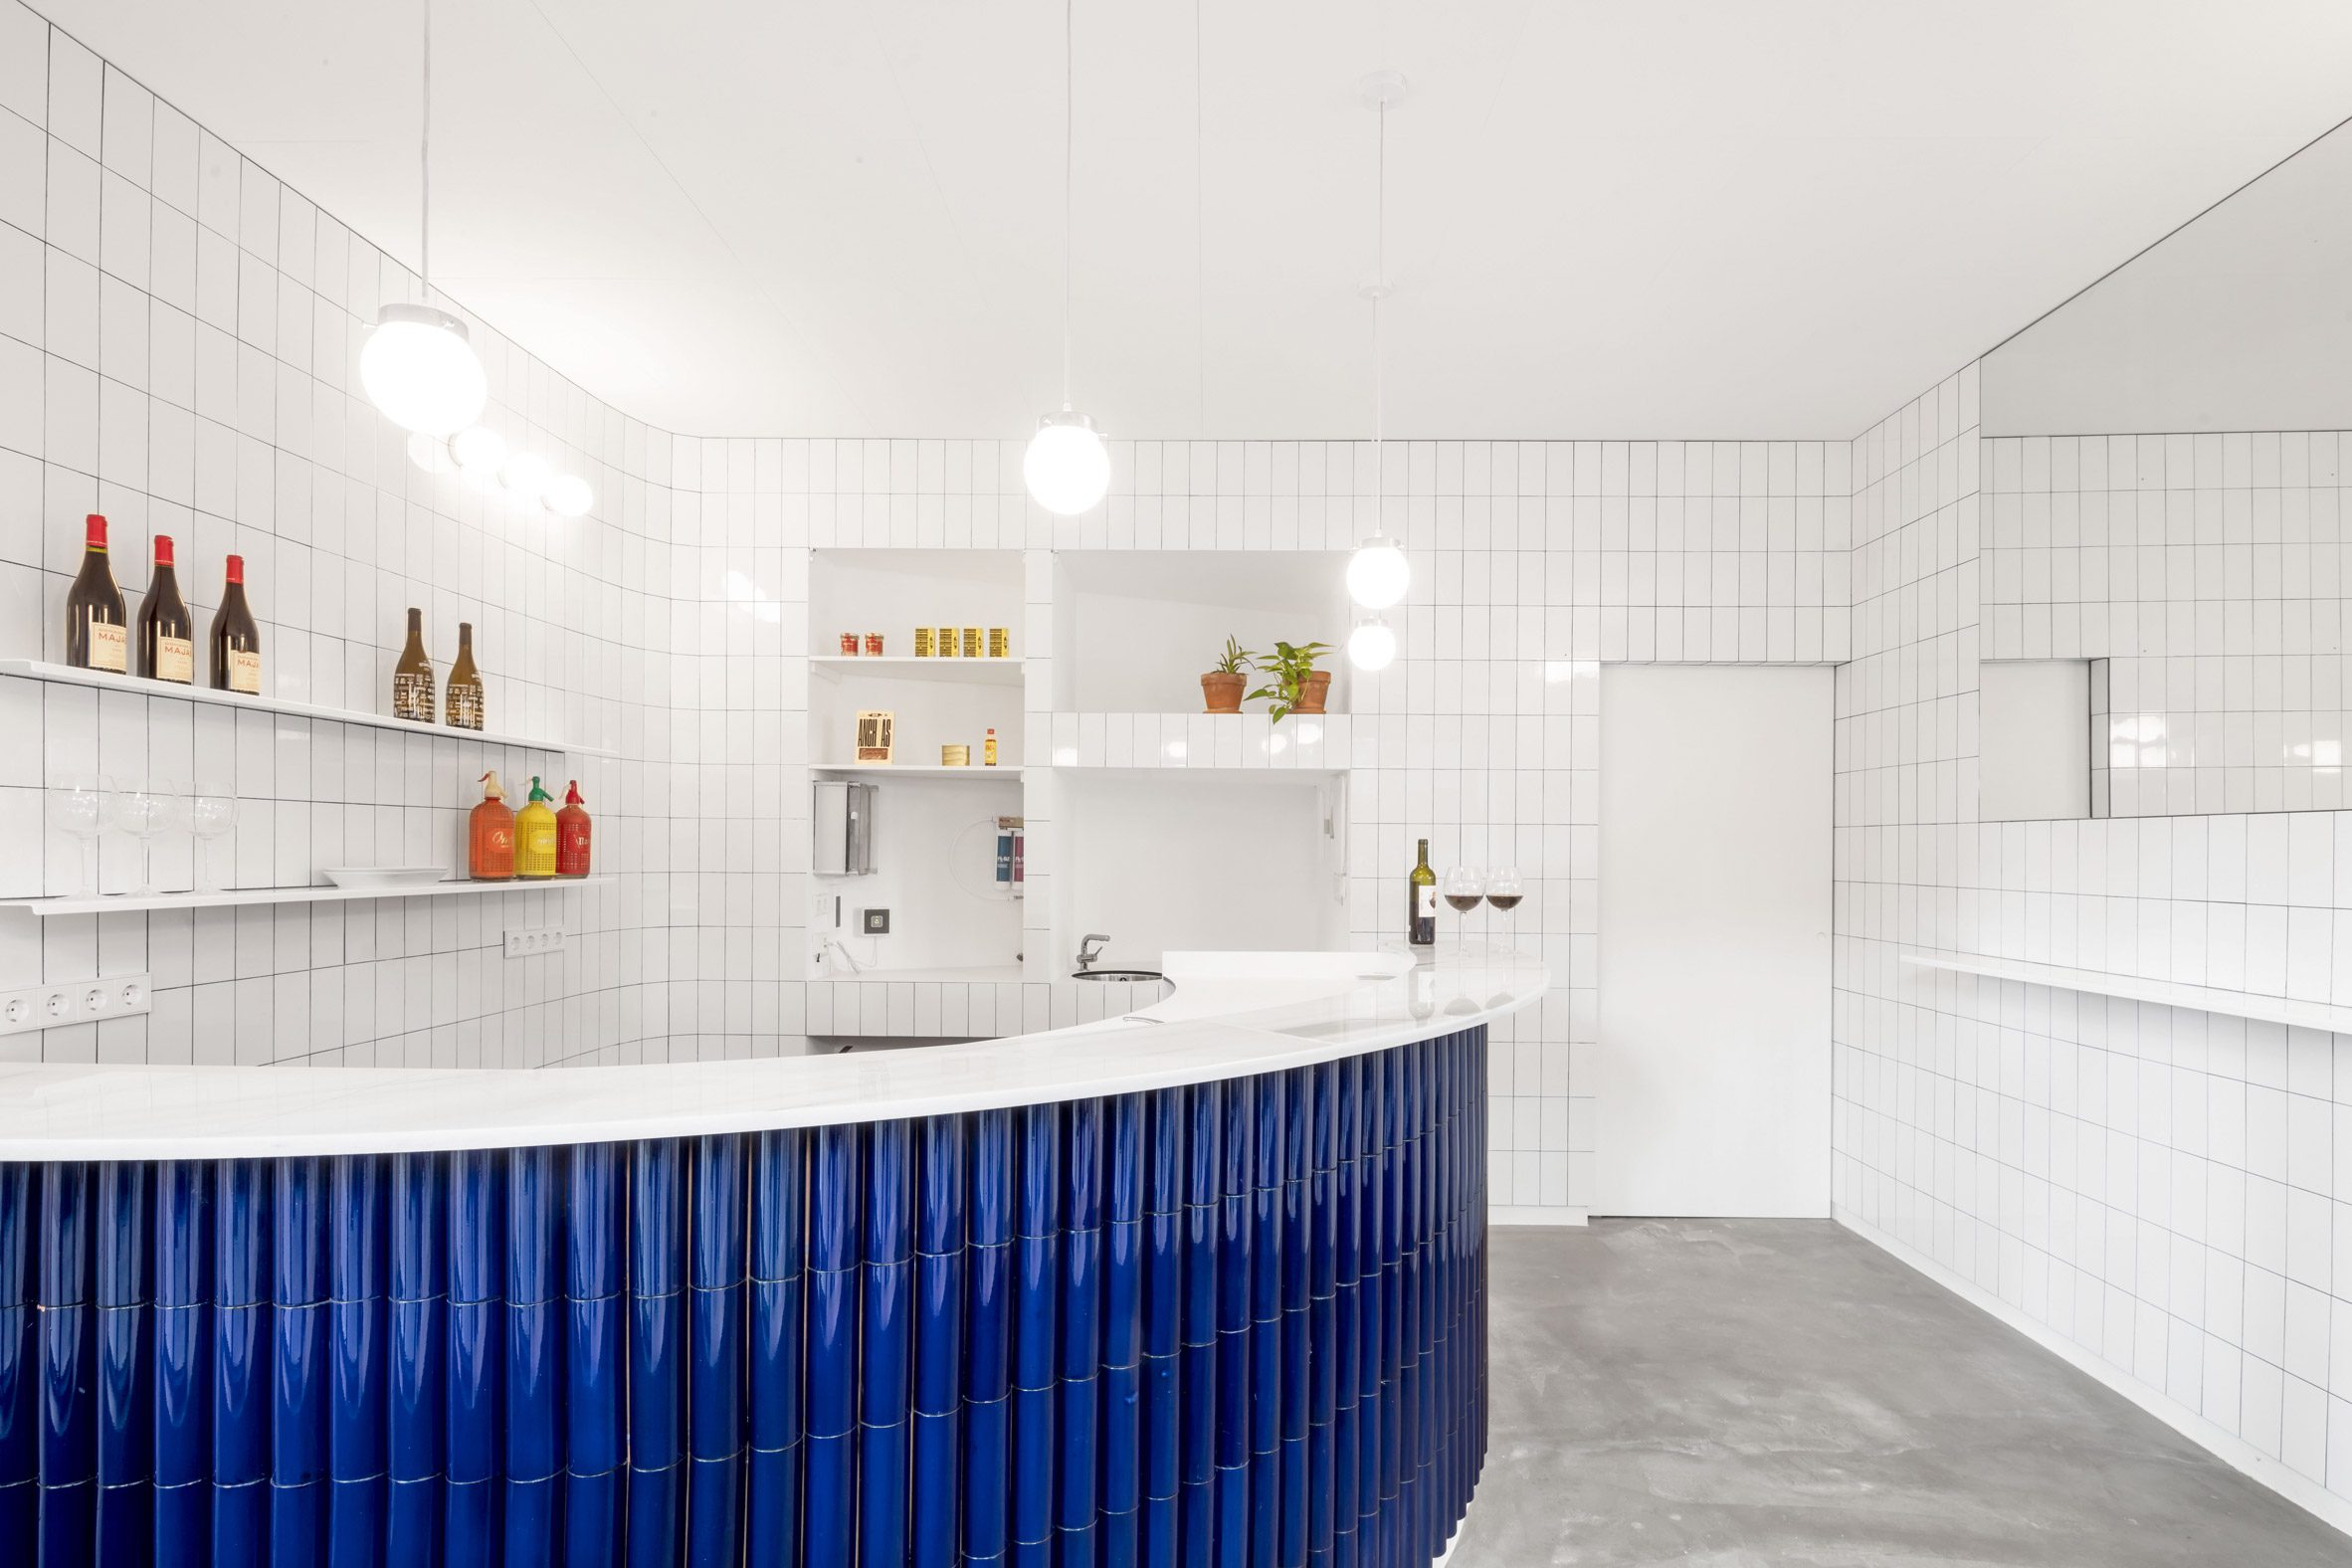 A bar featuring white and blue tiles from the Tiles of Spain Awards